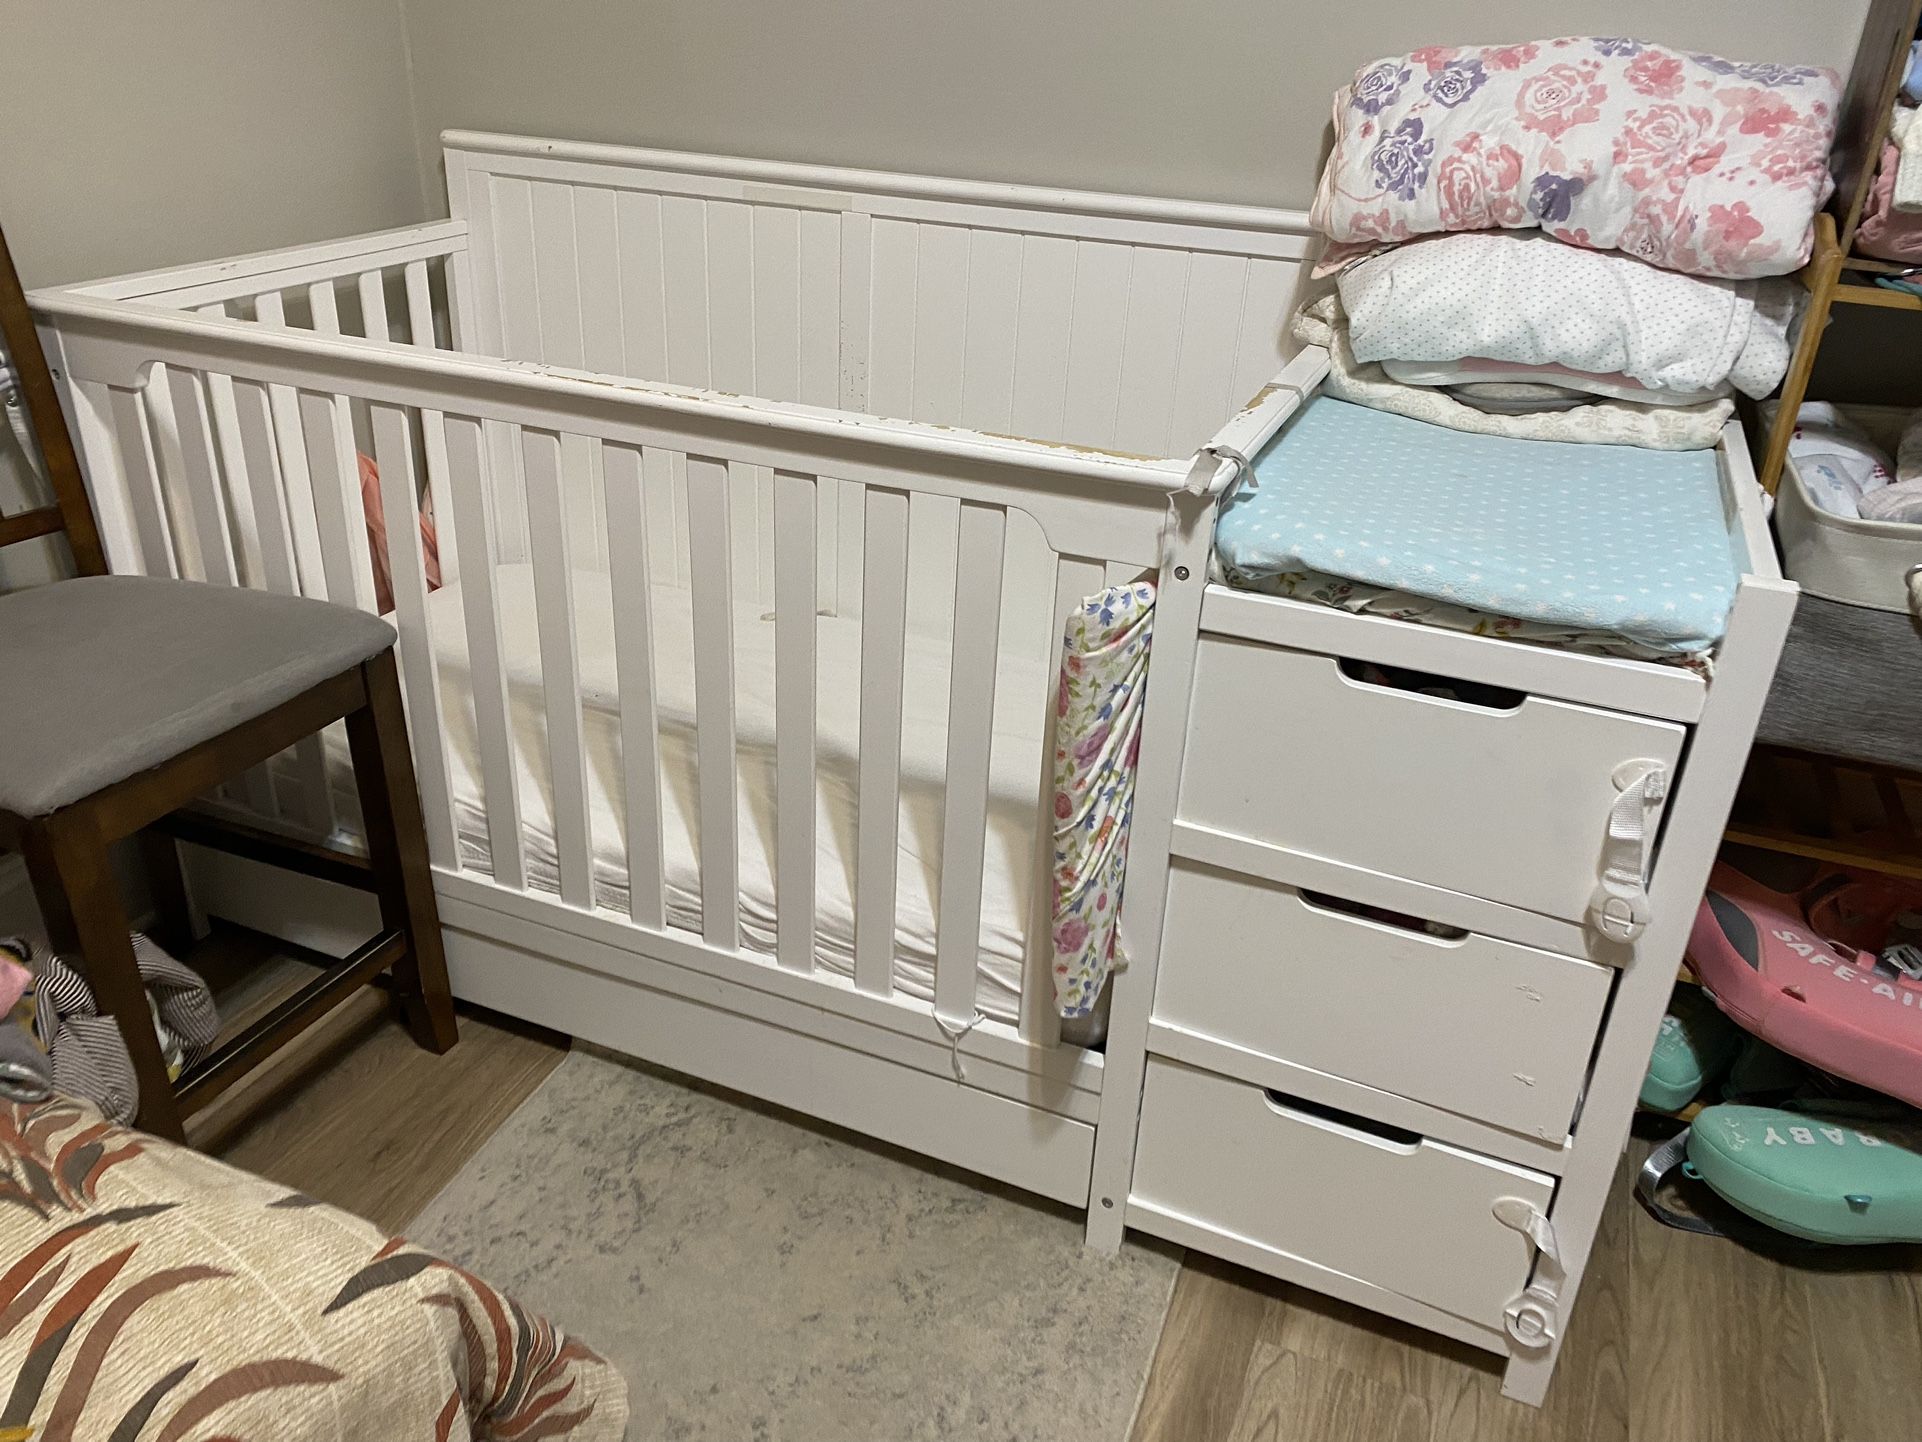 Graco Baby Bed Crib With Matress And Changing Table 